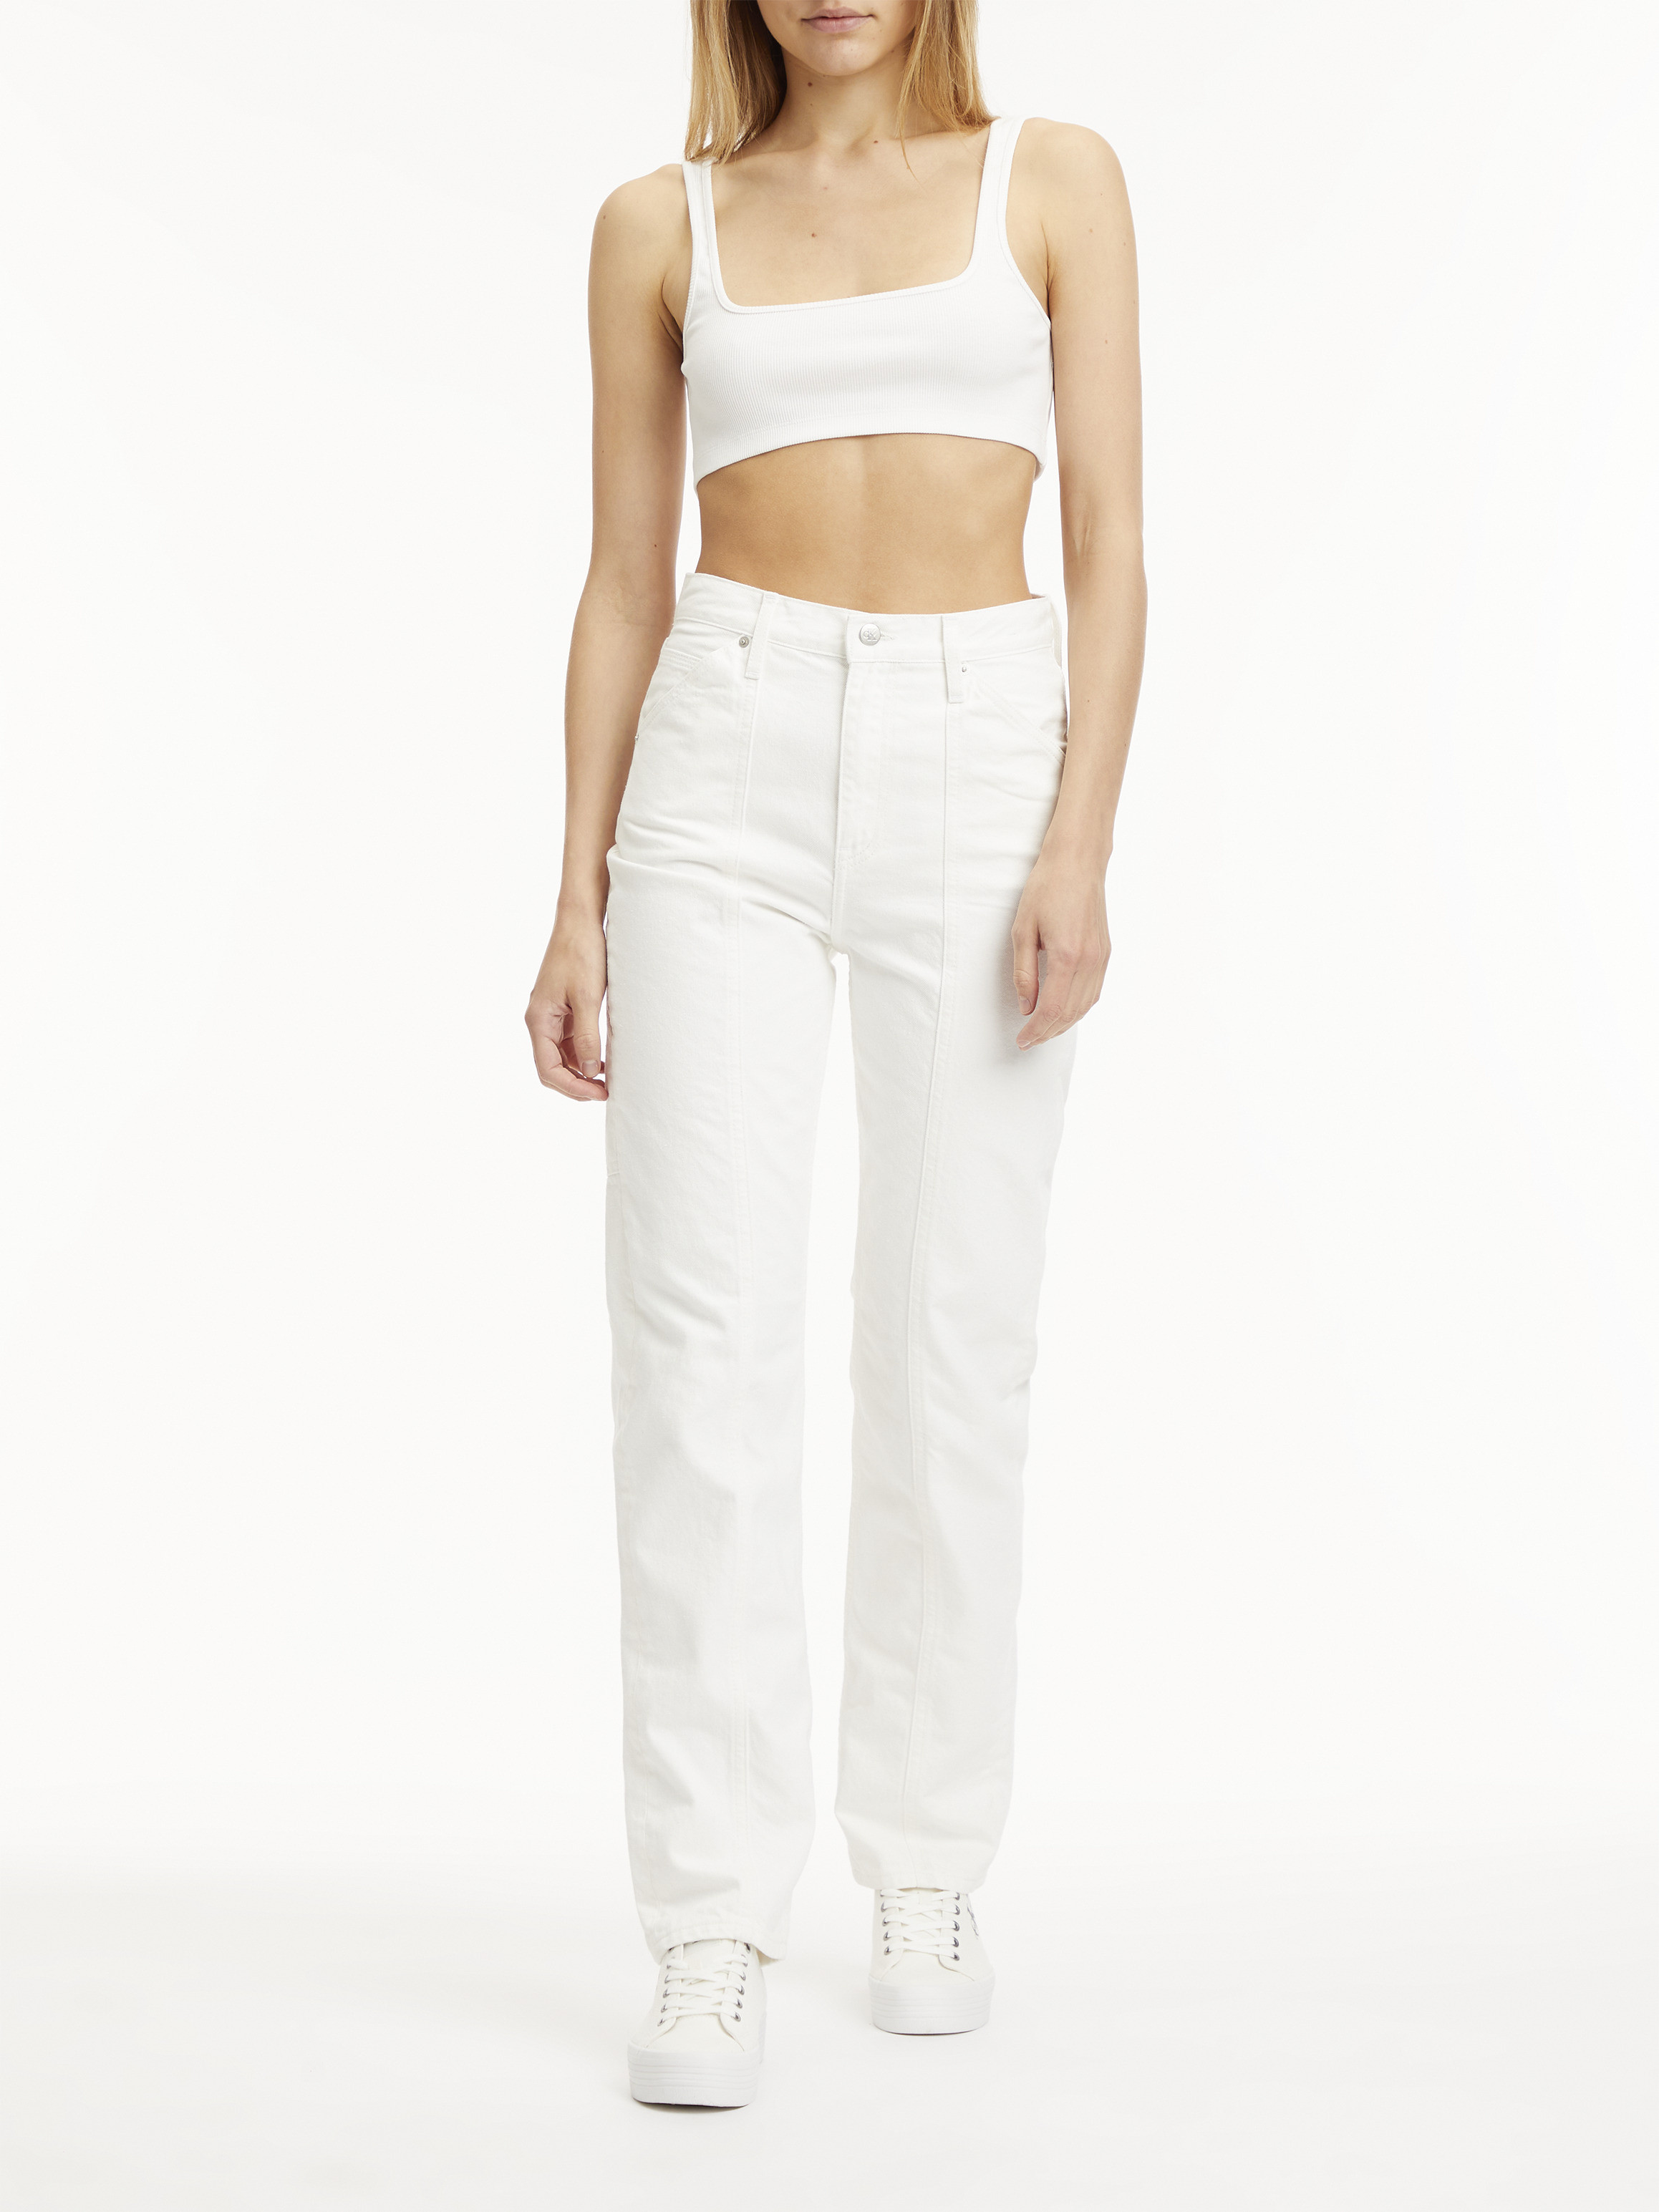 Calvin Klein Jeans - Straight cotton jeans, White, large image number 2